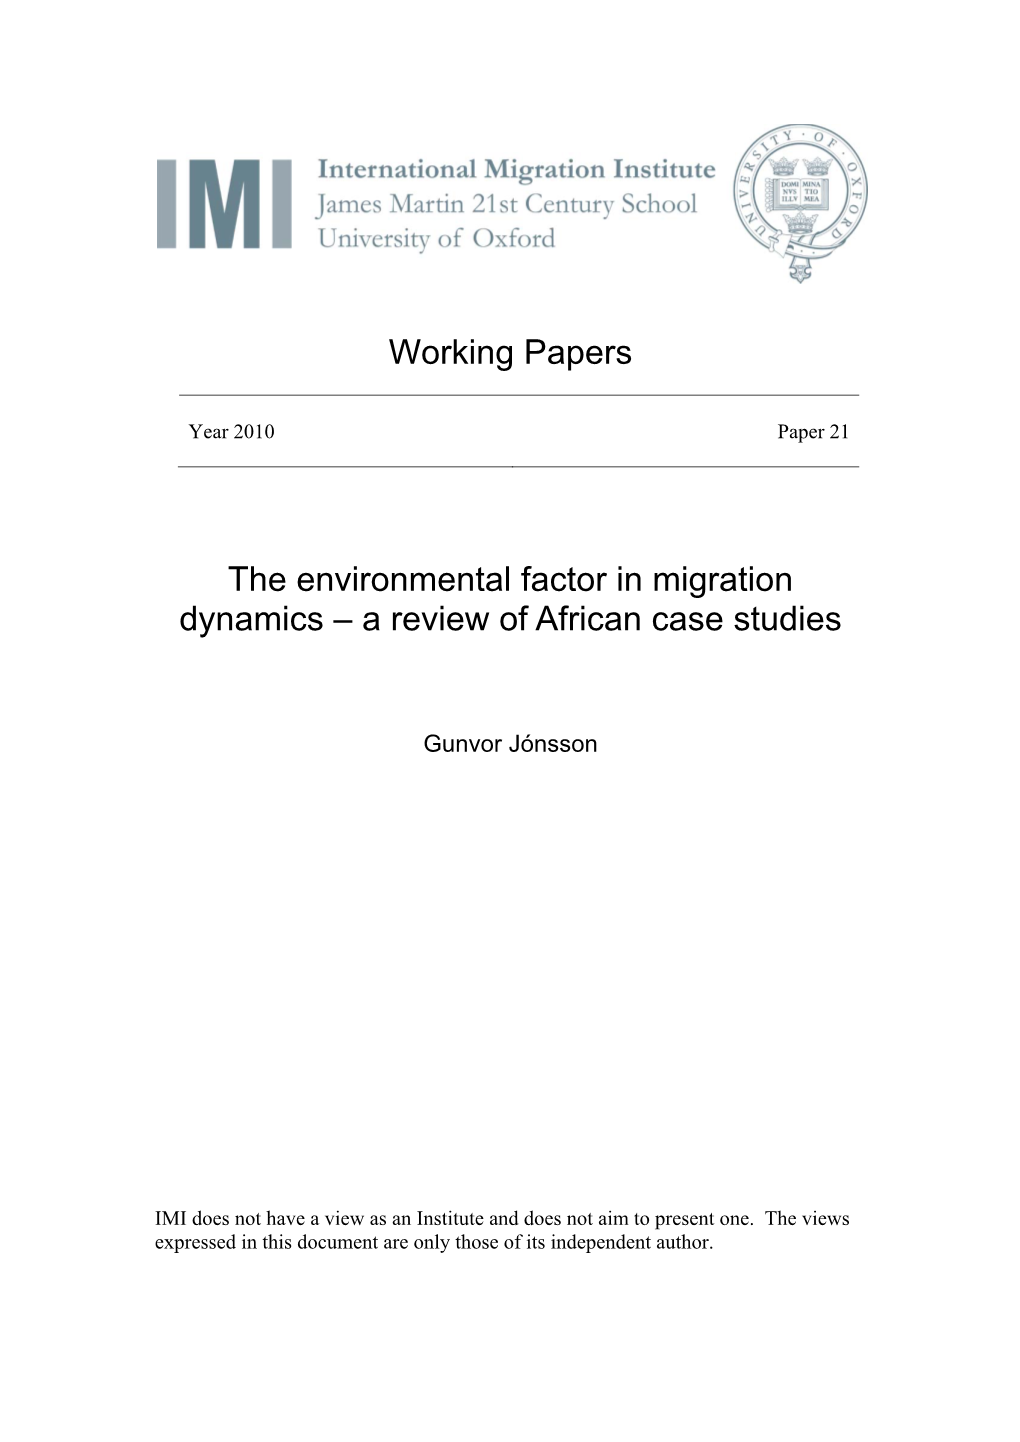 The Environmental Factor in Migration Dynamics – a Review of African Case Studies